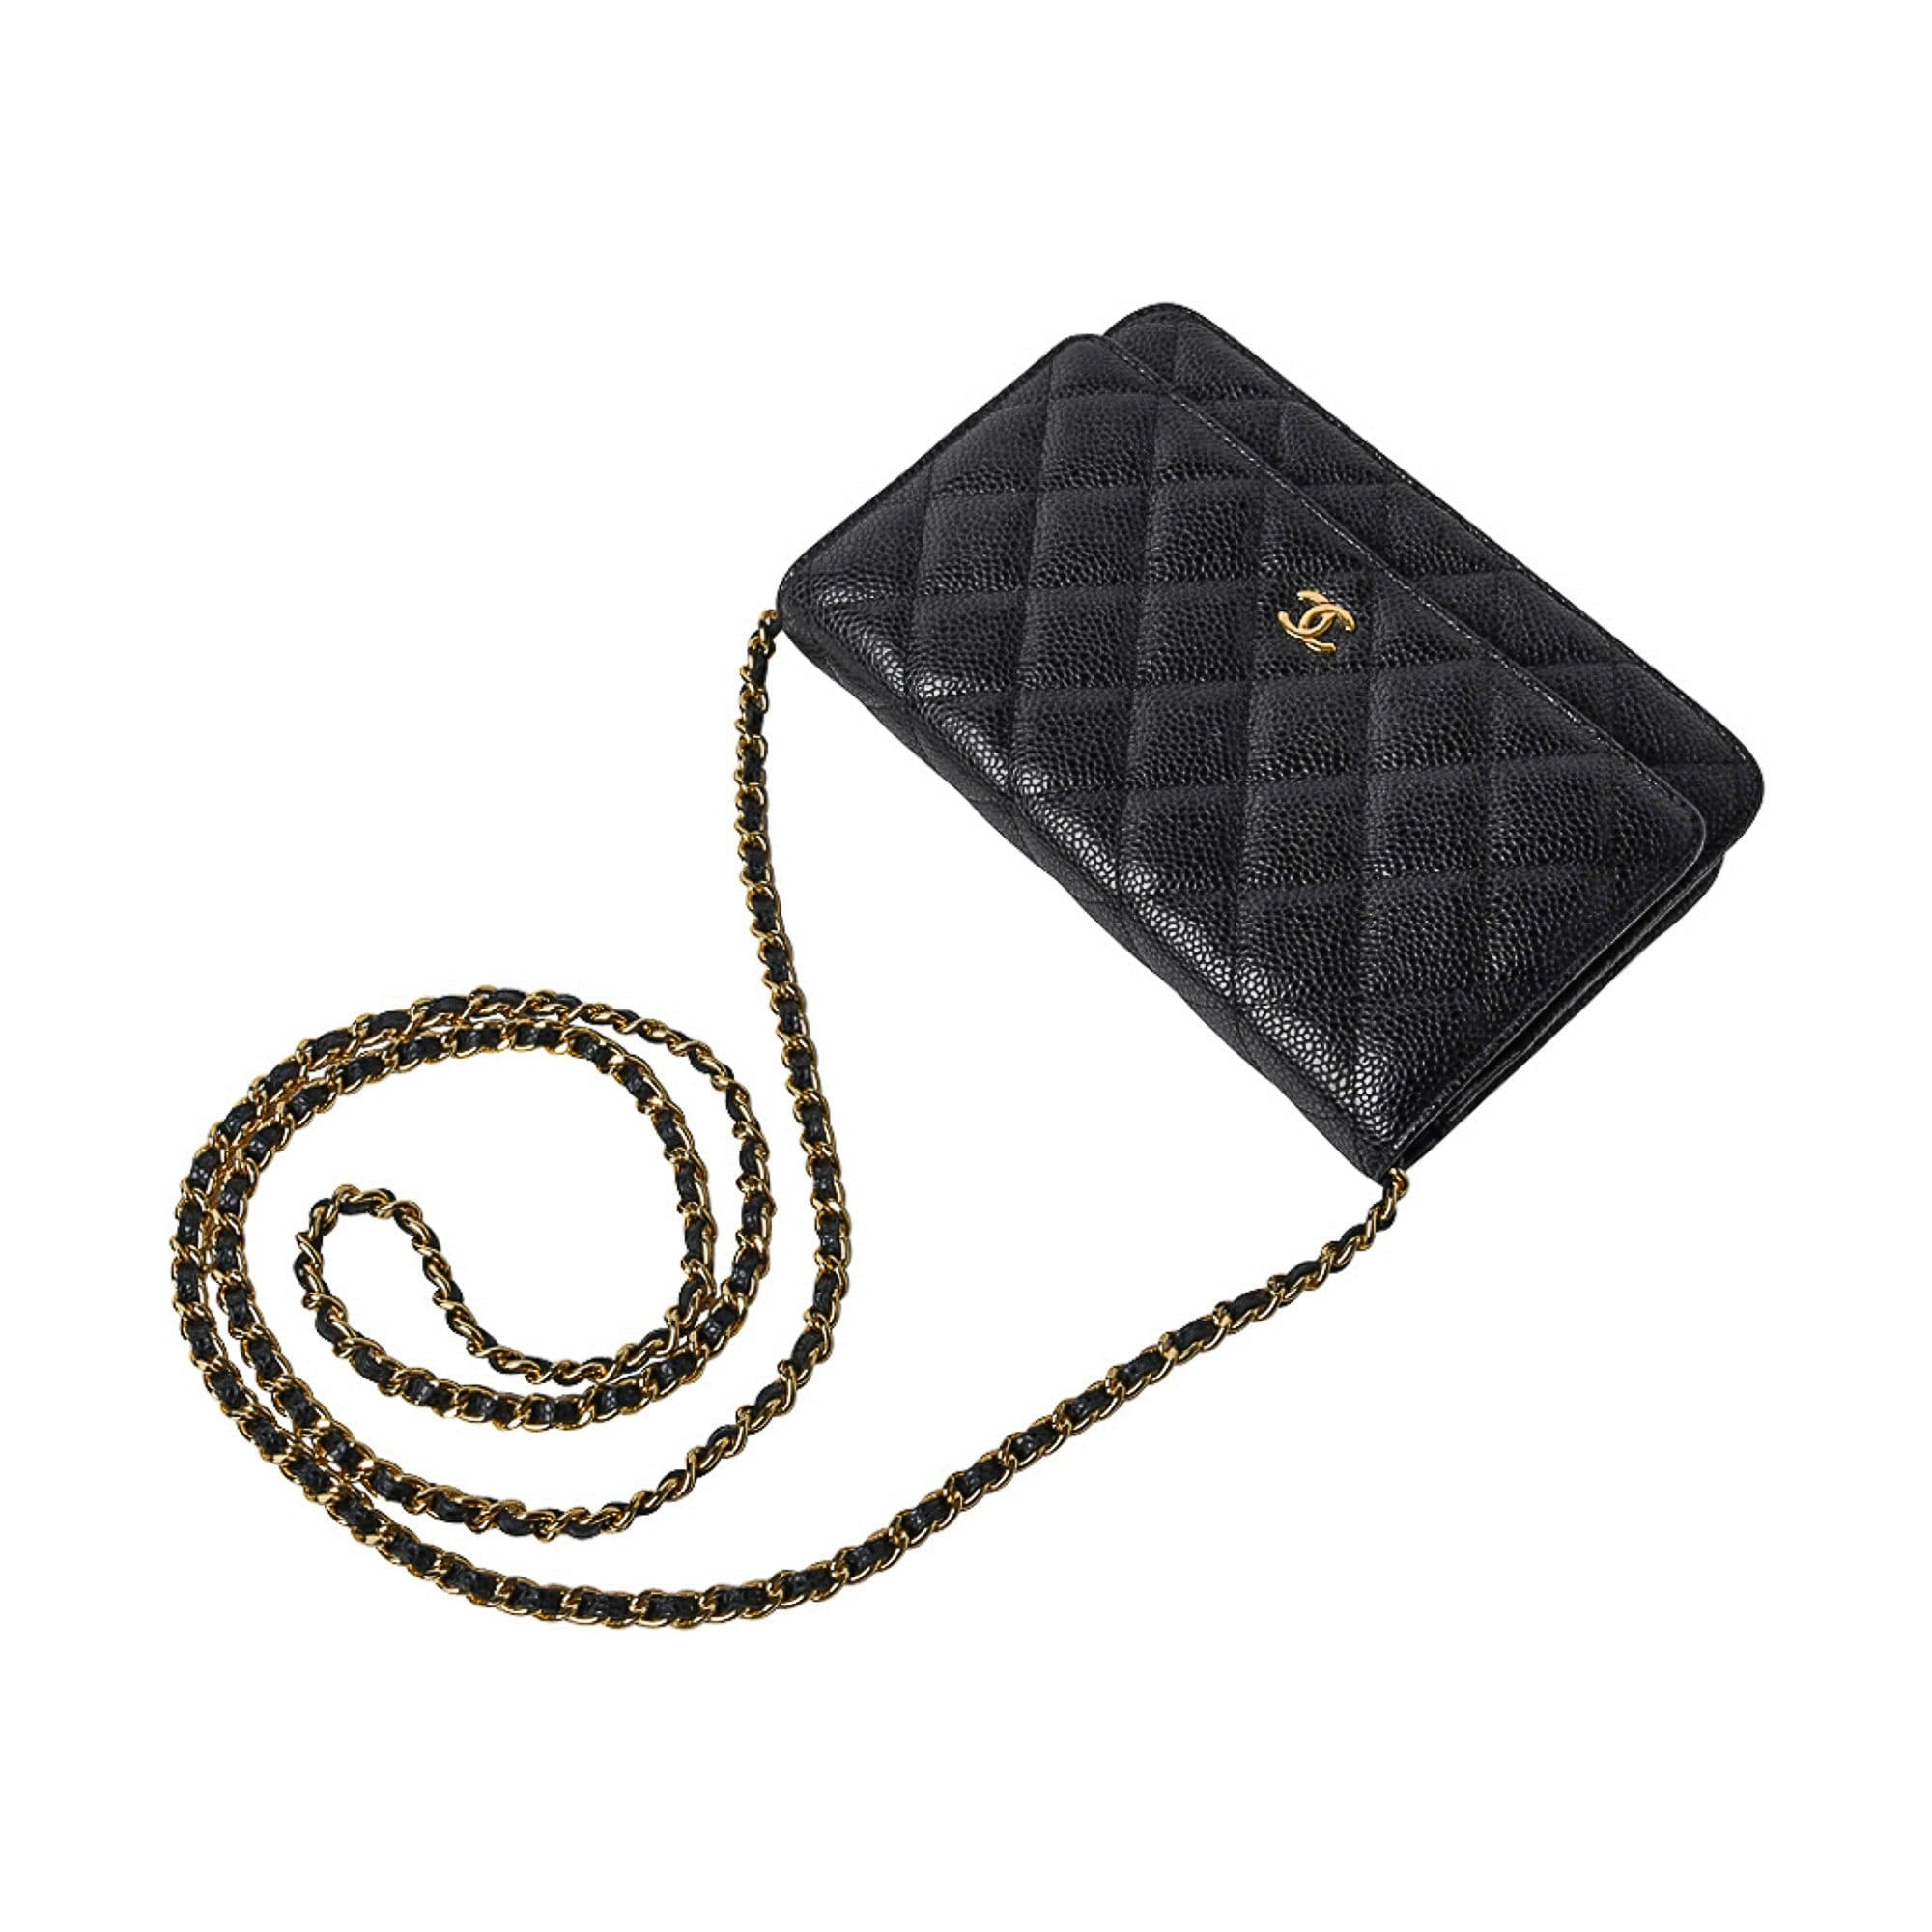 Chanel Quilted Caviar Wallet on Chain